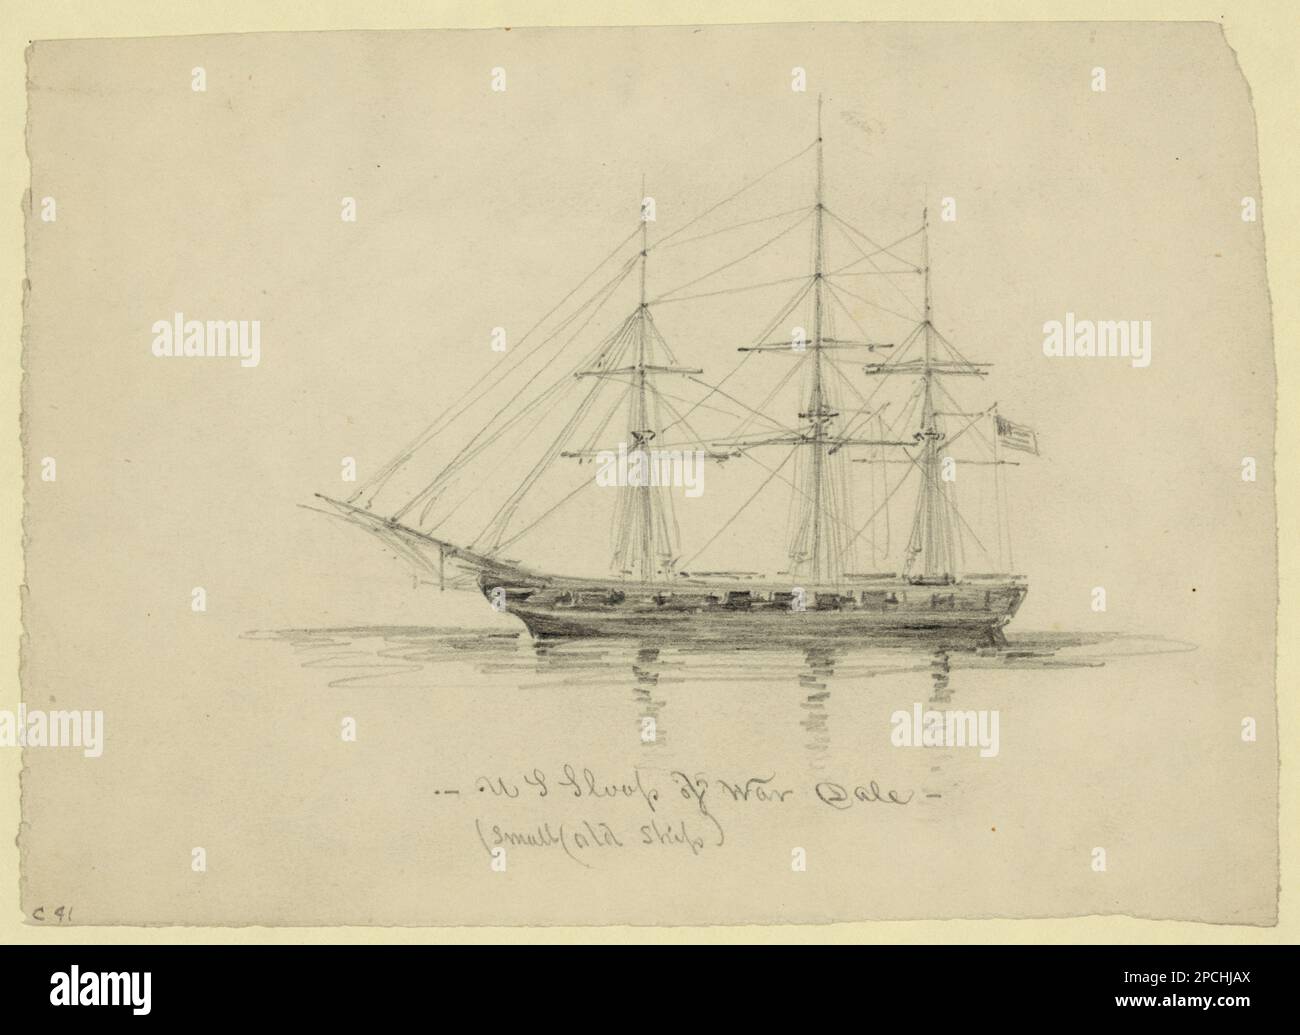 U.S. Sloop of War Dale. Morgan collection of Civil War drawings. Dale (Ship), 1860-1870, Ships, 1860-1870, United States, History, Civil War, 1861-1865, Transportation, United States Stock Photo